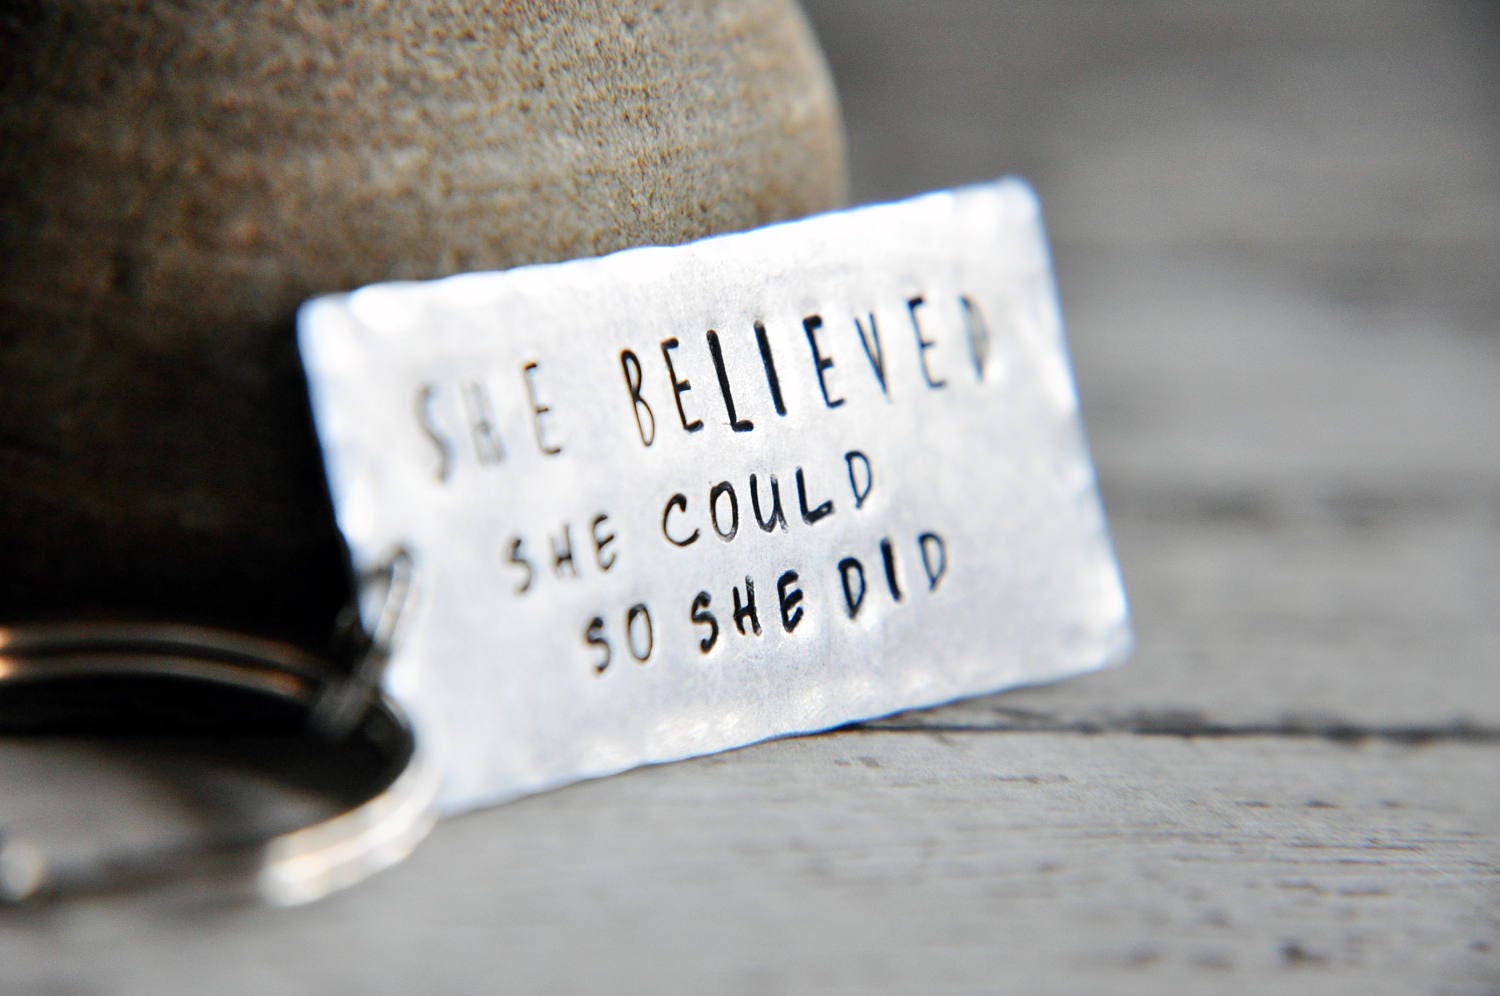 She Believed She Could Keychain, Motivational Gift, Inspirational Keyc –  Simple Reminders